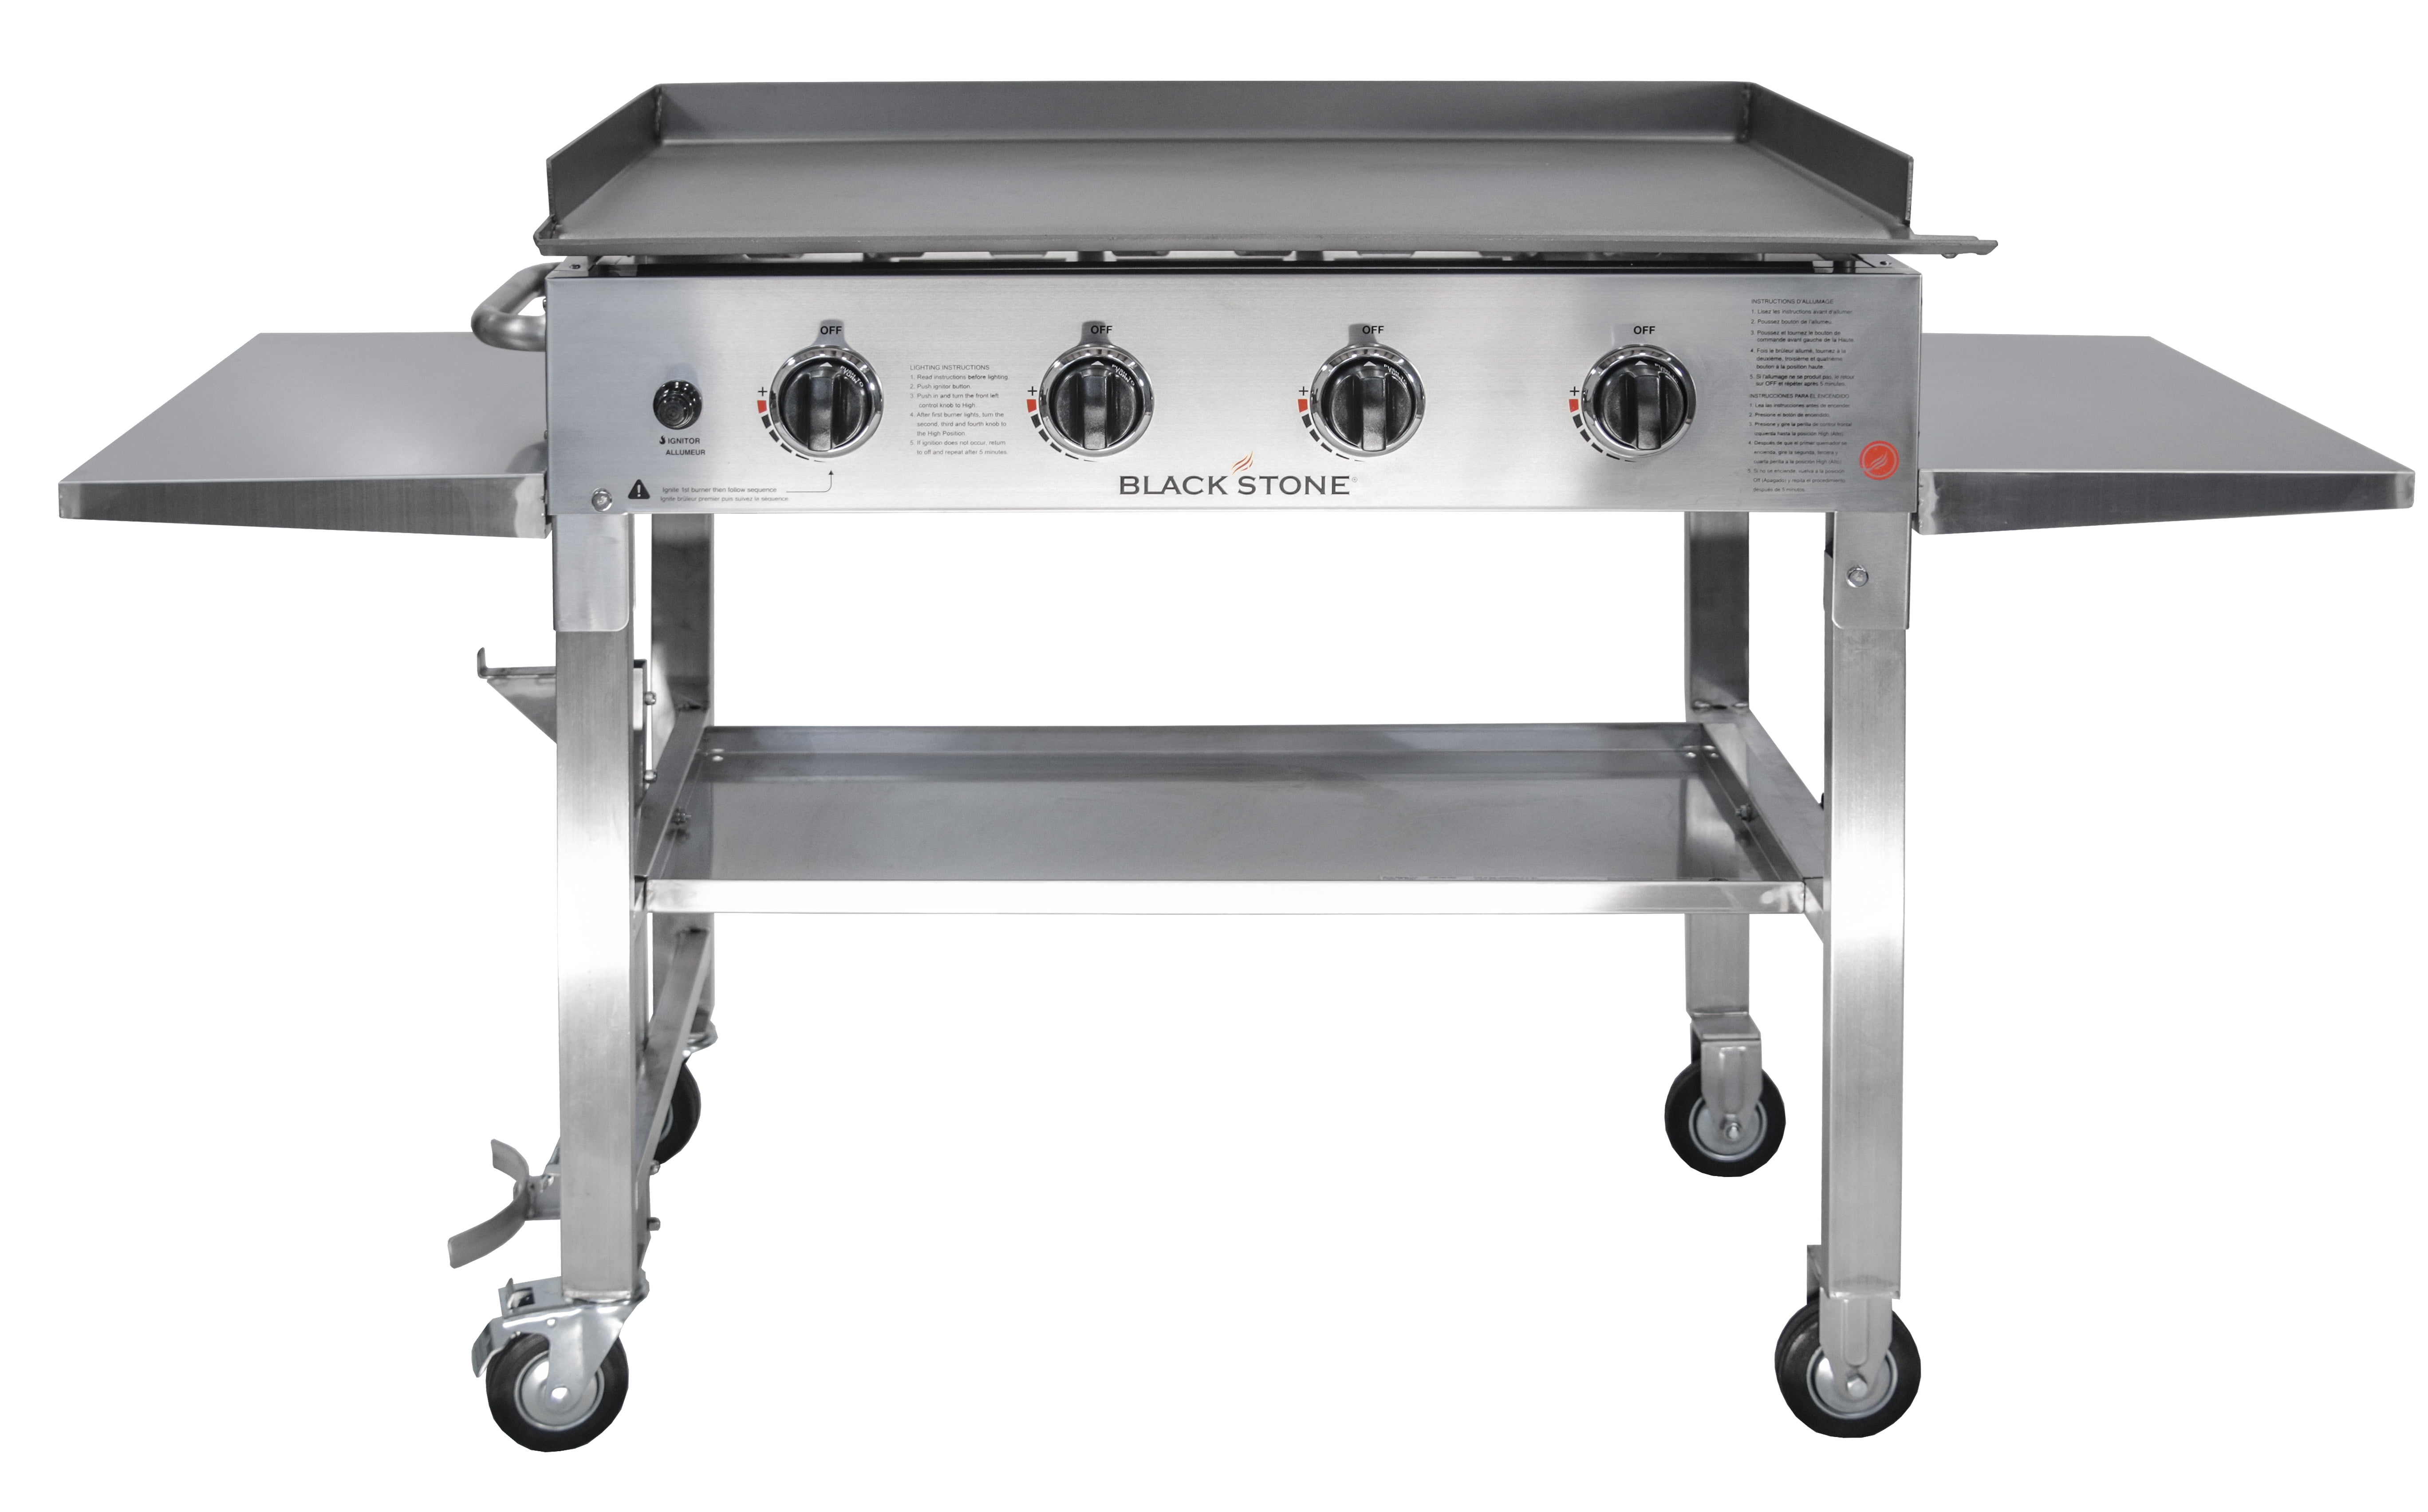 Blackstone 36" Stainless-Steel Griddle Cooking Station - Walmart.com Blackstone Griddle Stainless Steel Top